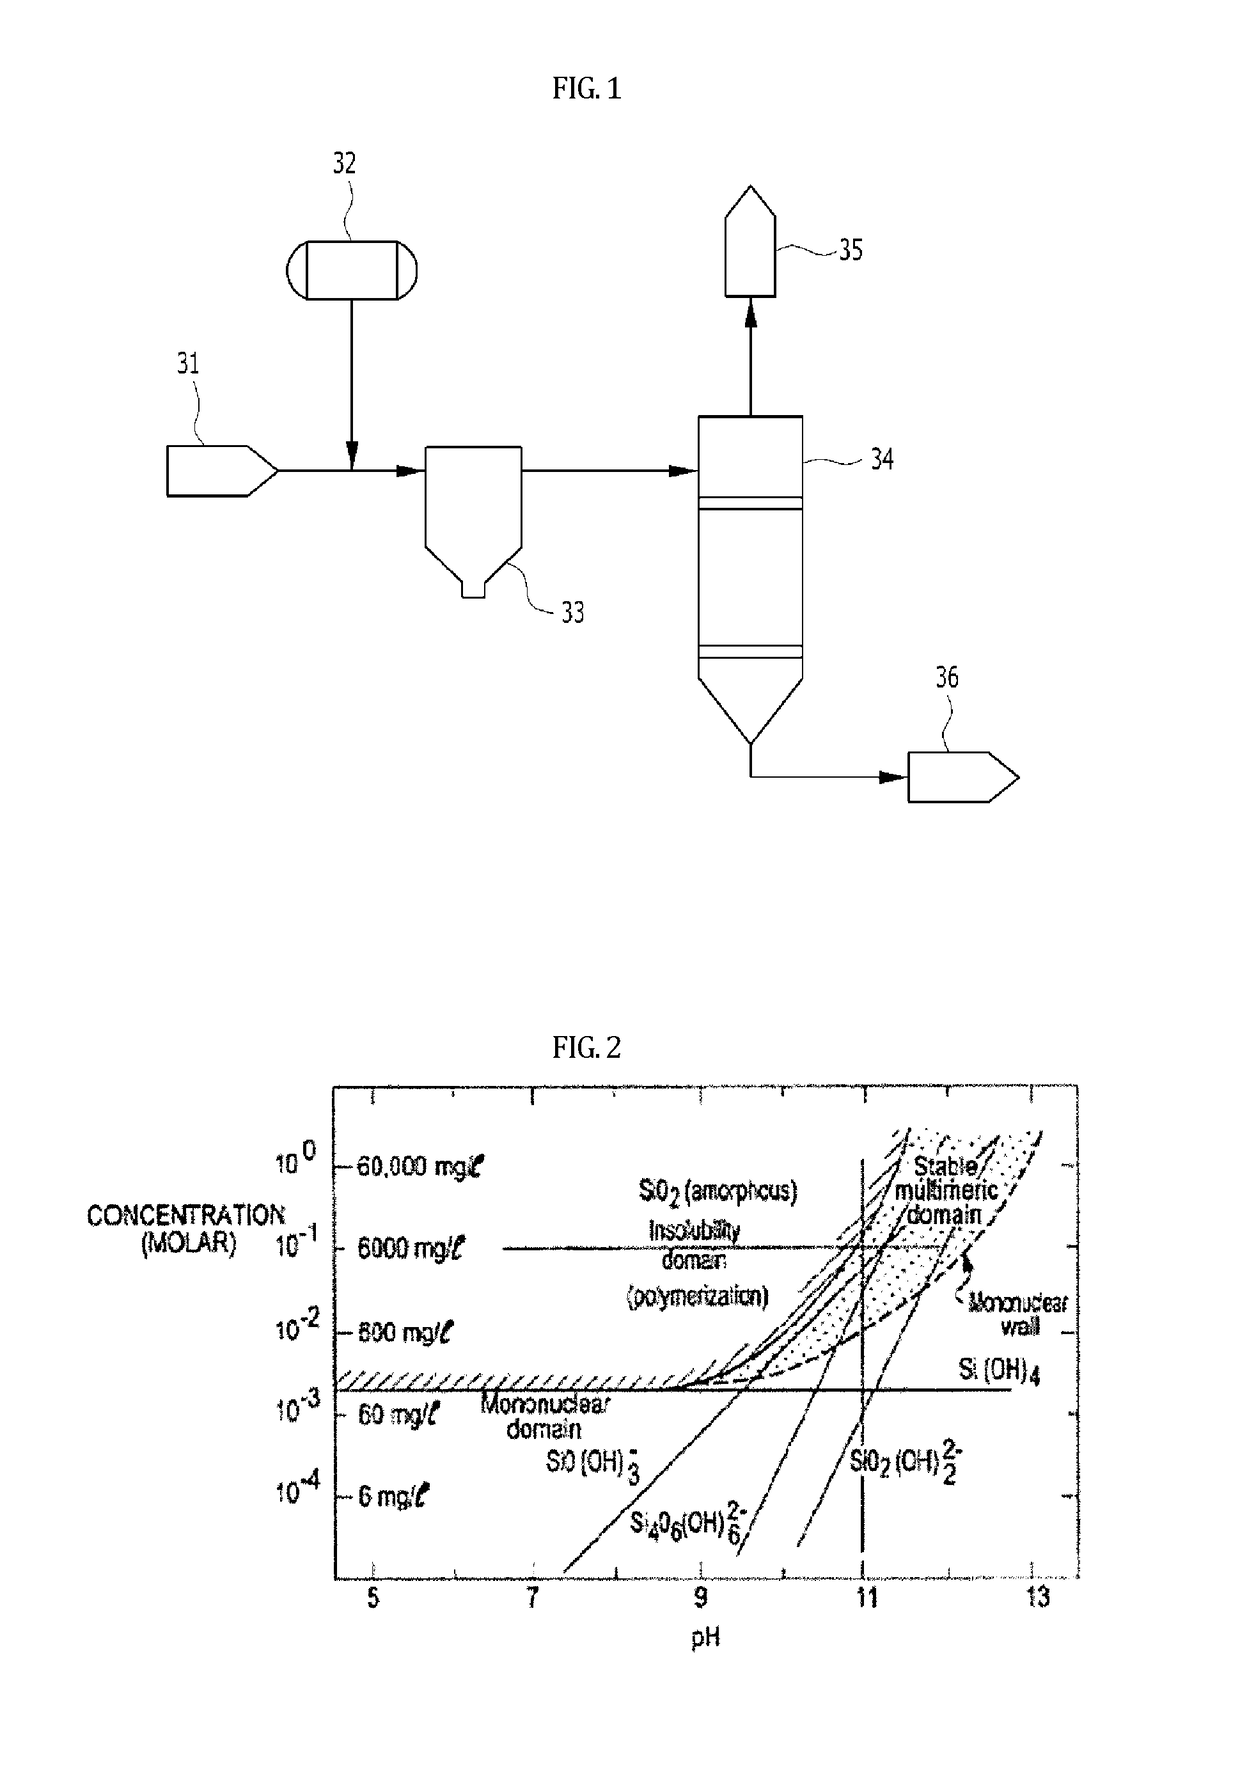 Apparatus for evaporative concentration of water to be treated, which uses hot lime softening, and method for evaporative concentration of water using the same